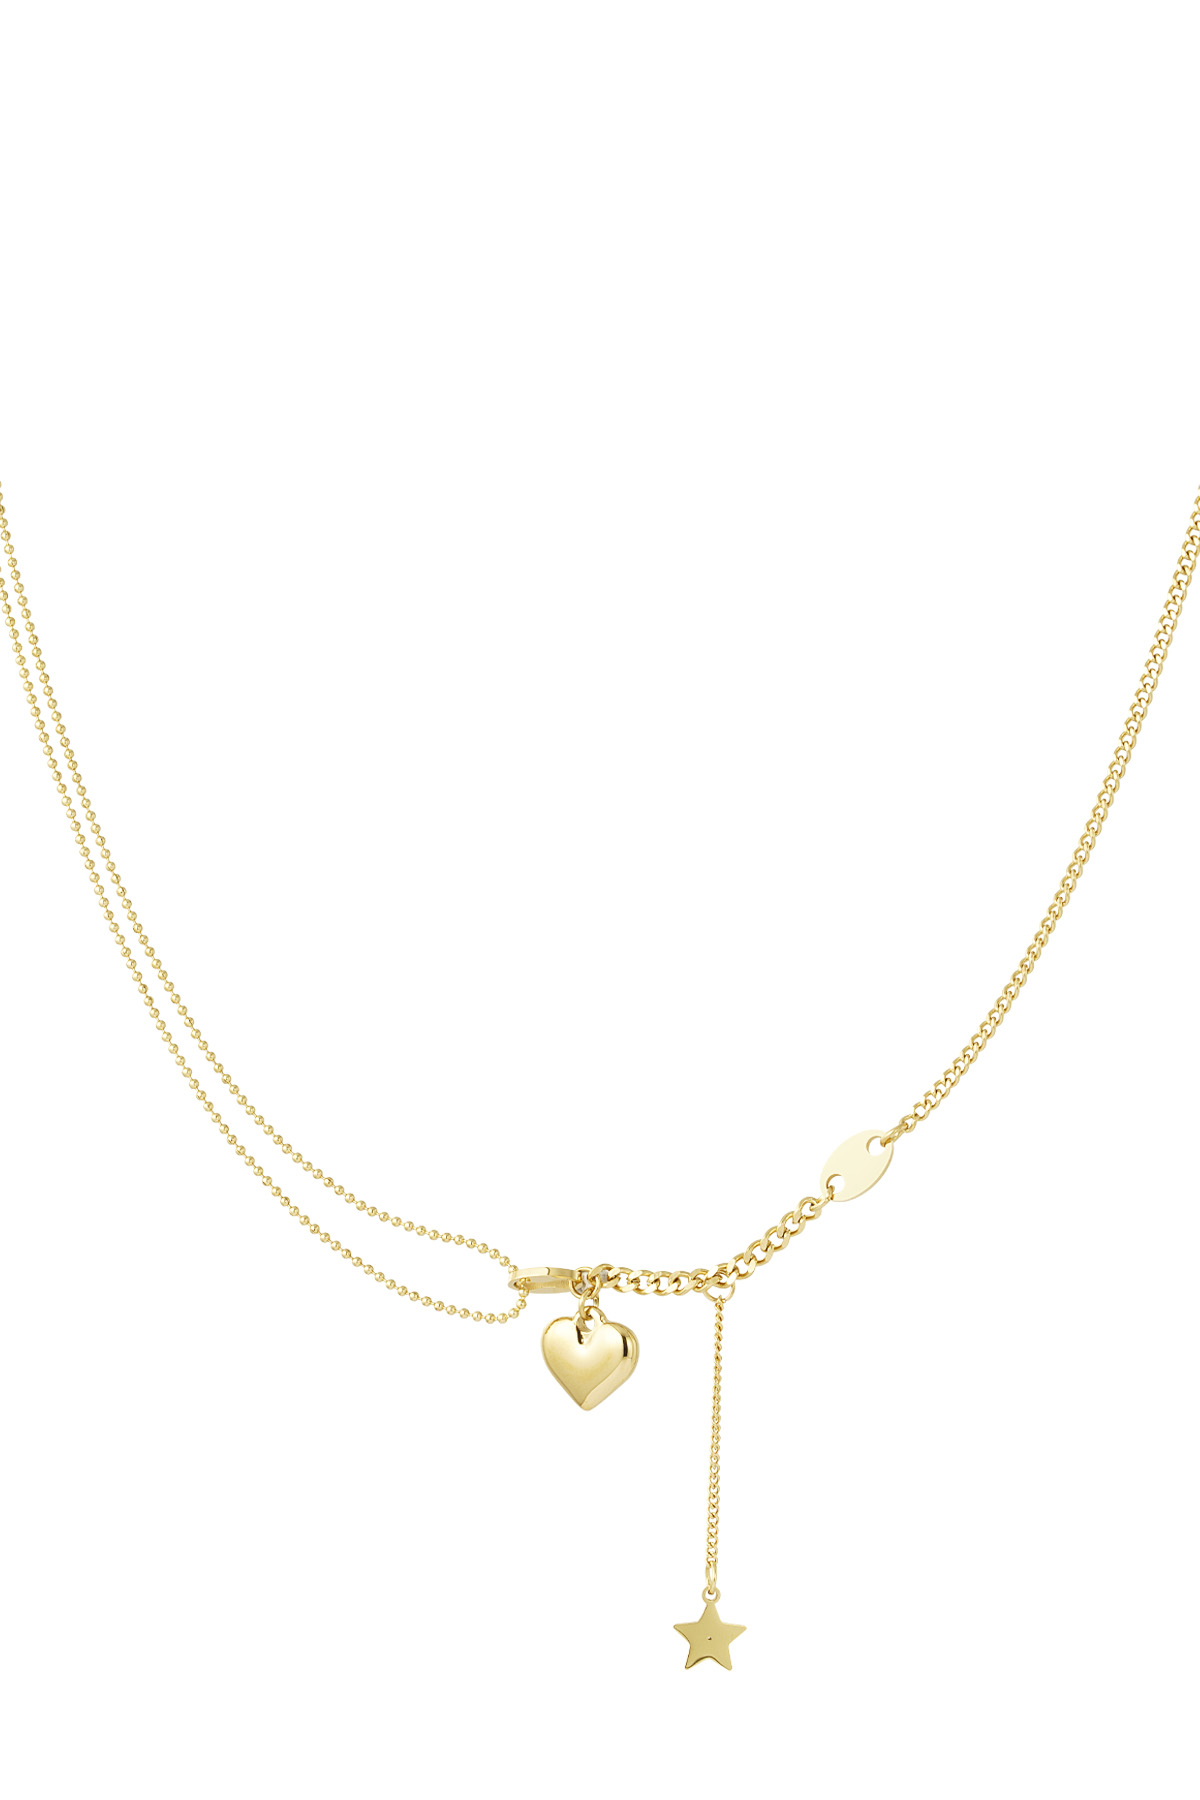 Necklace with heart and star charm - gold 